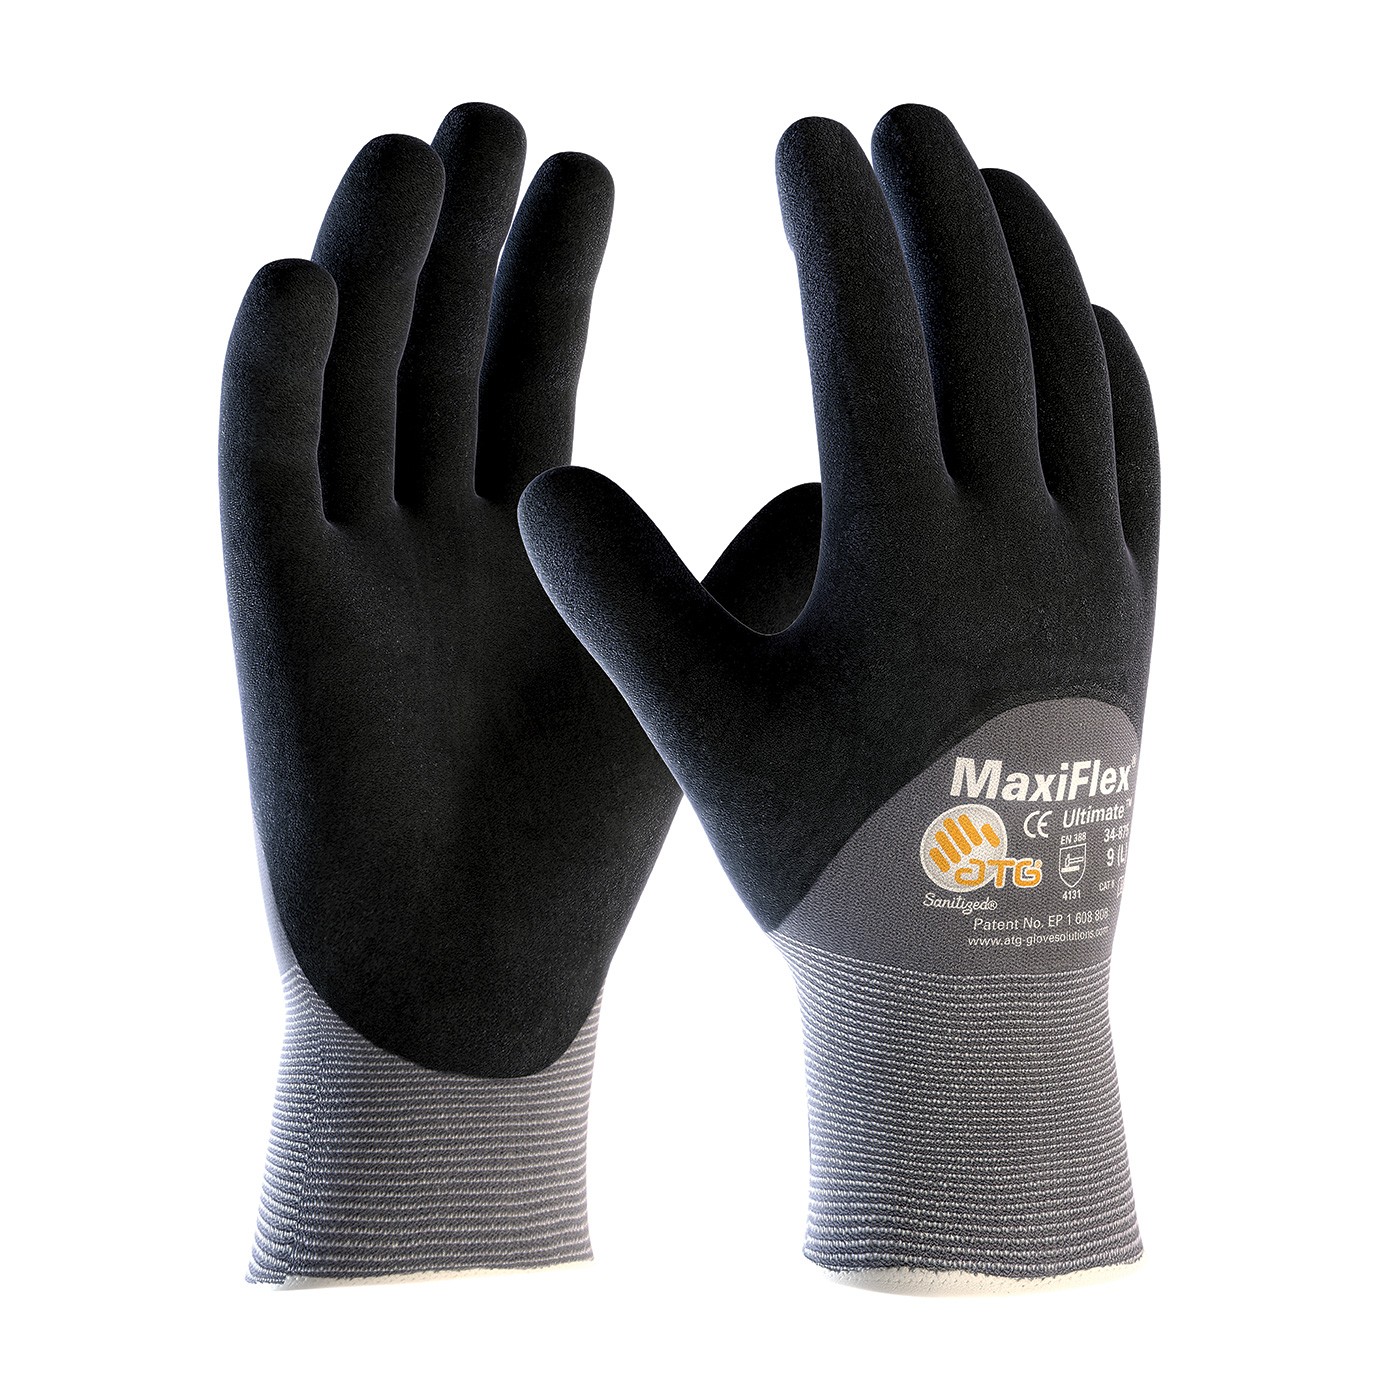 MaxiFlex® Ultimate™ Seamless Knit Nylon / Lycra Glove with Nitrile Coated MicroFoam Grip on Palm, Fingers & Knuckles (#34-875)